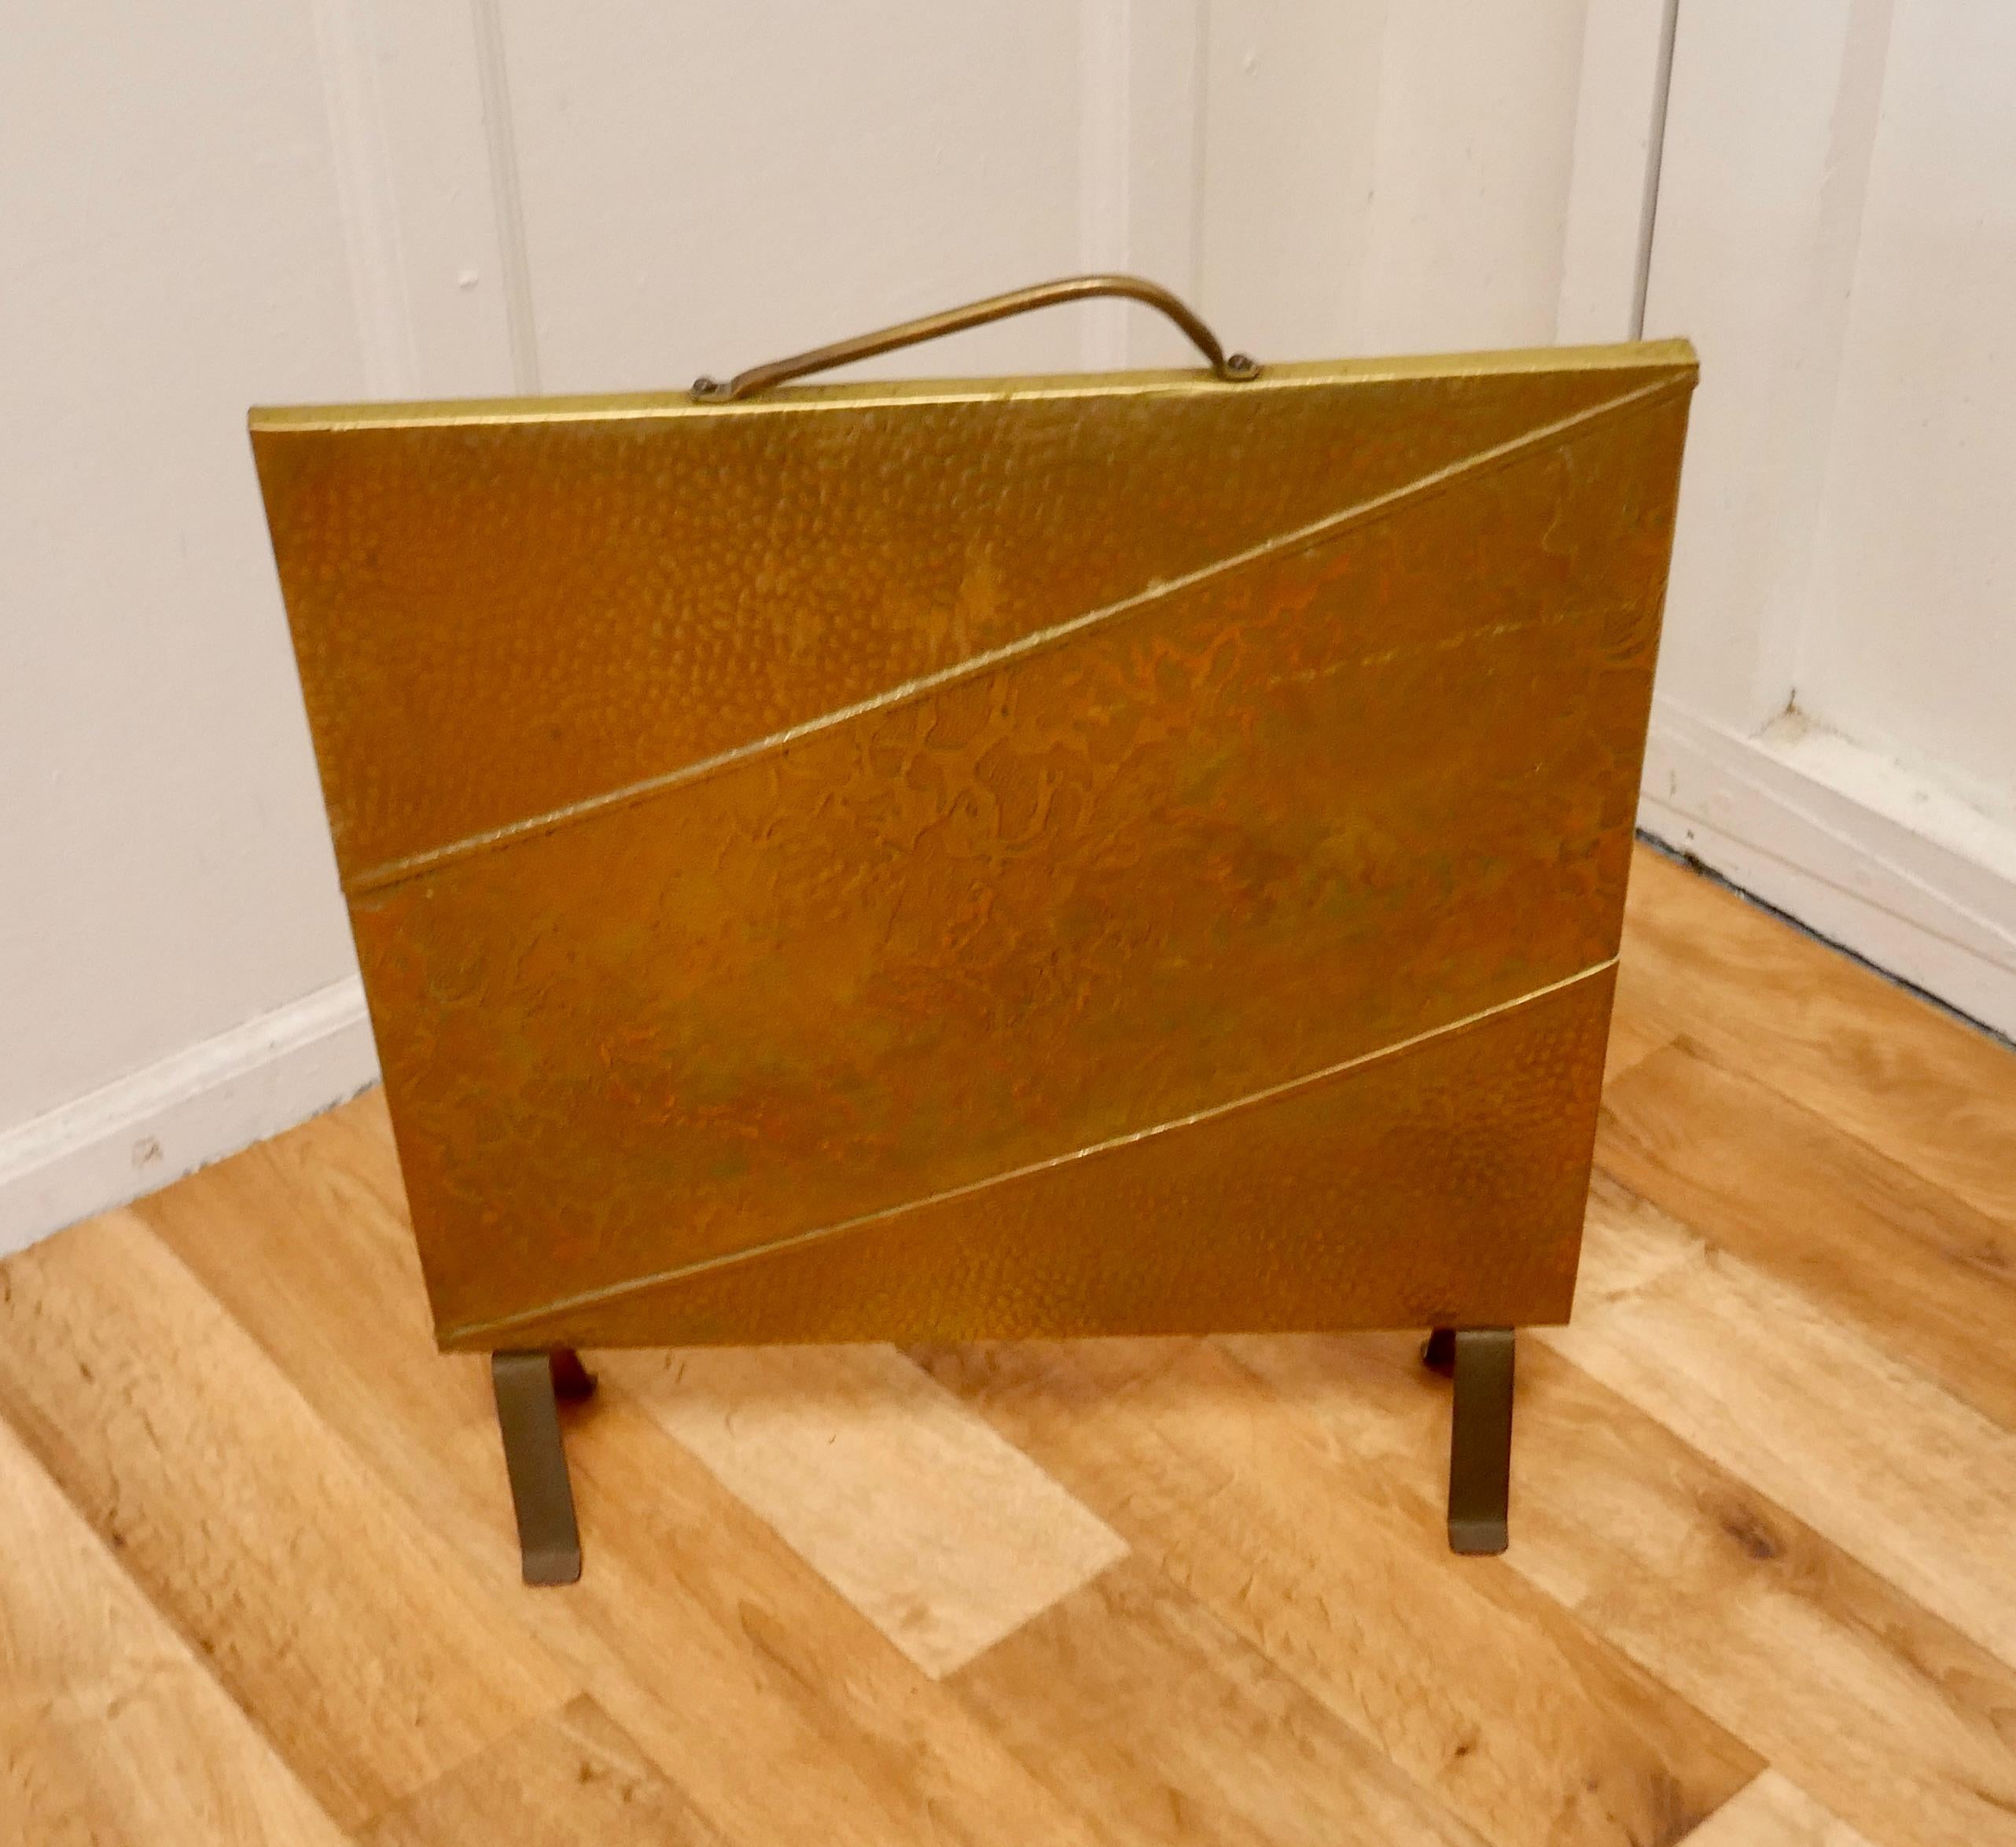 Stylish Art Deco Beaten Brass Fire Screen In Good Condition For Sale In Chillerton, Isle of Wight